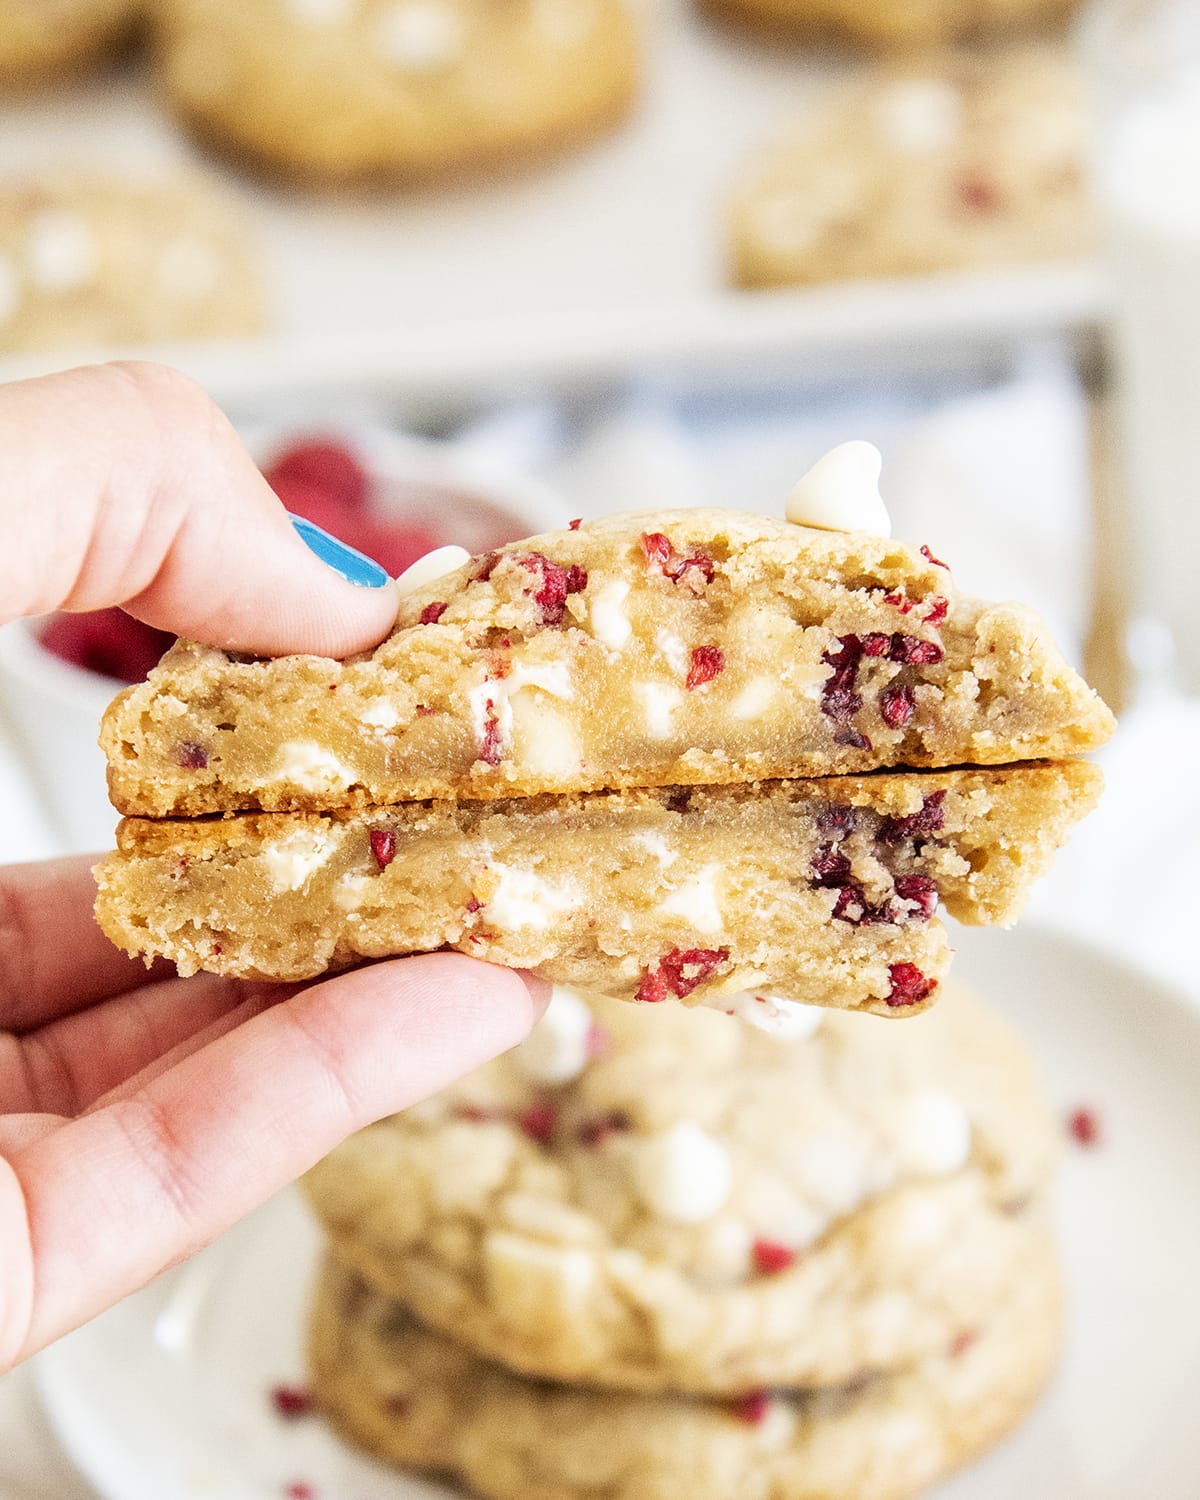 A hand holding a giant cookie that is cut in half showing the inside of the cookie. It looks slightly gooey, and there are white chocolate chips and pieces of dried raspberries..